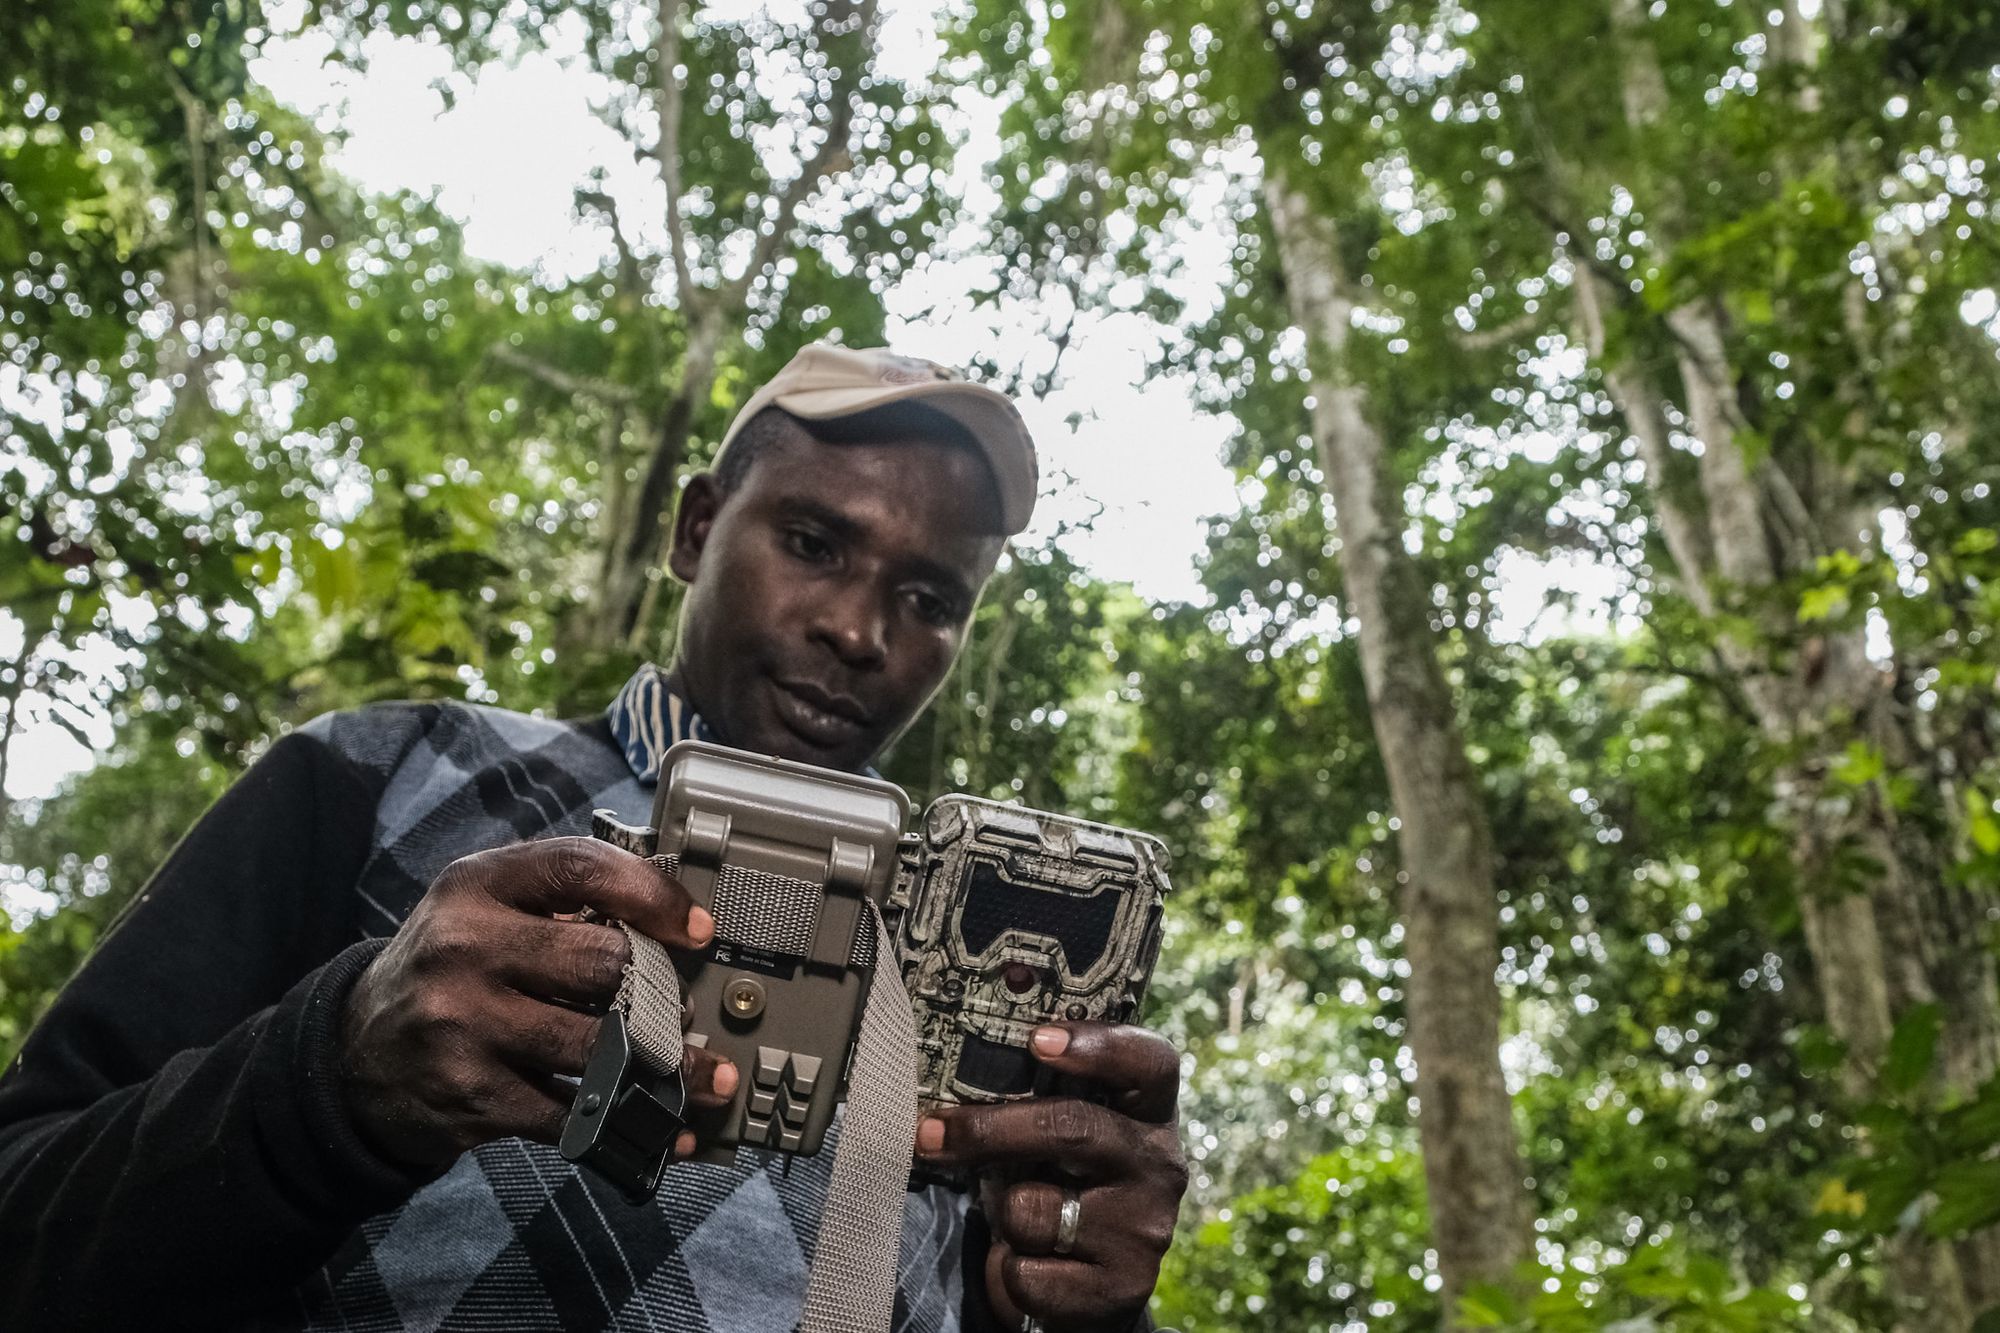 A man stands in a forest holding an open camera trap